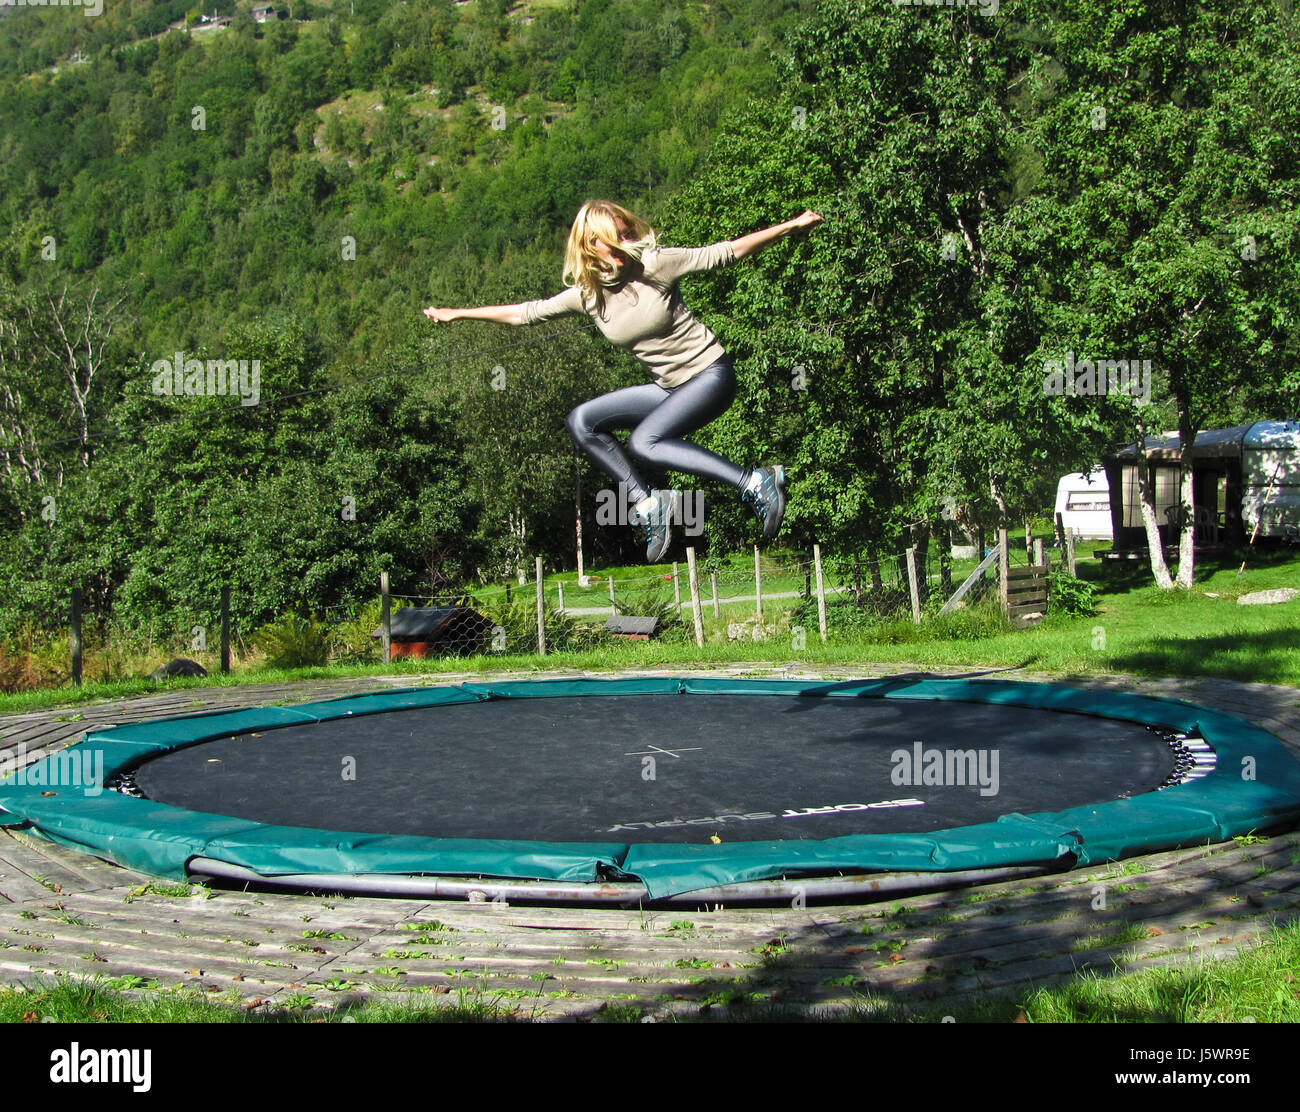 Girl jumping on a trampoline Stock Photo